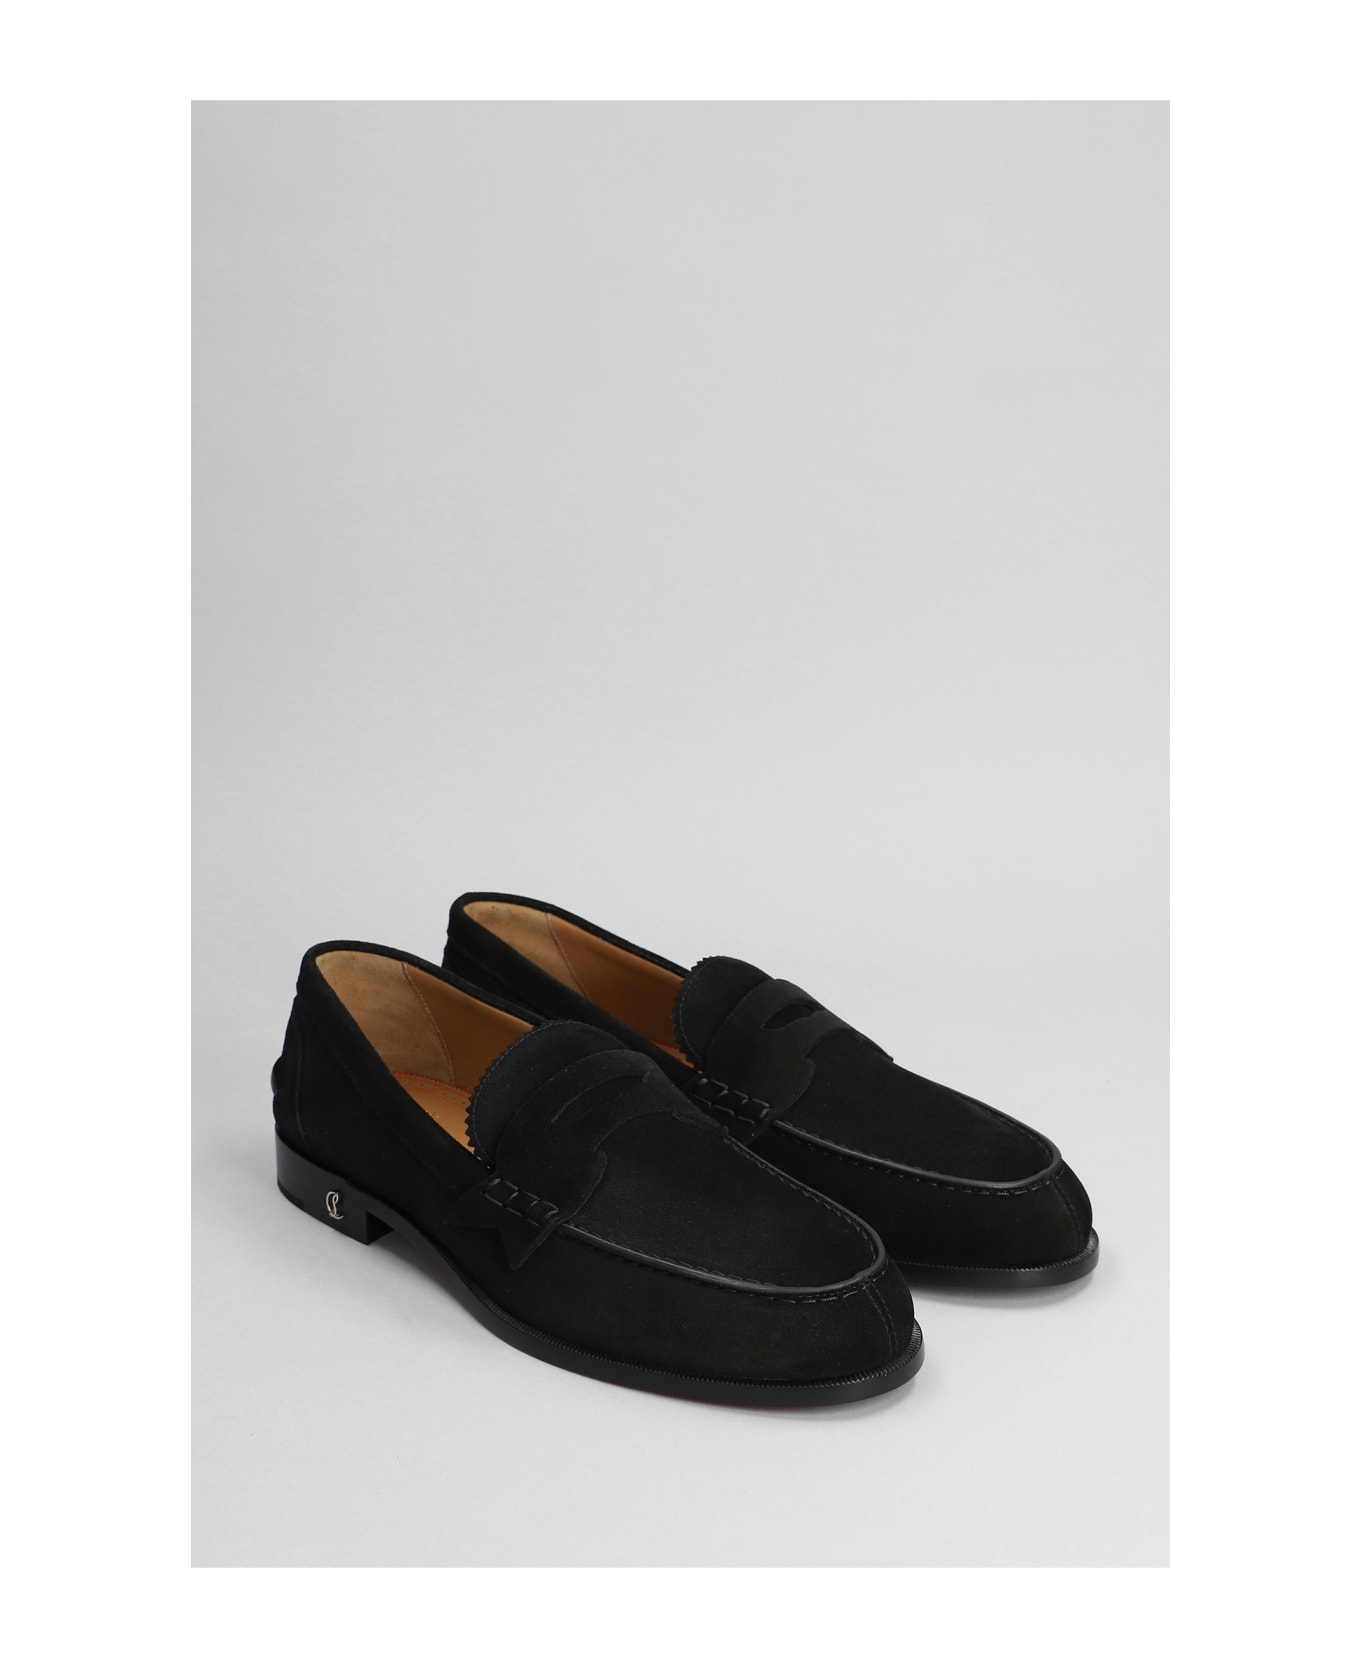 Christian Louboutin No Penny Loafers In Black Suede - black